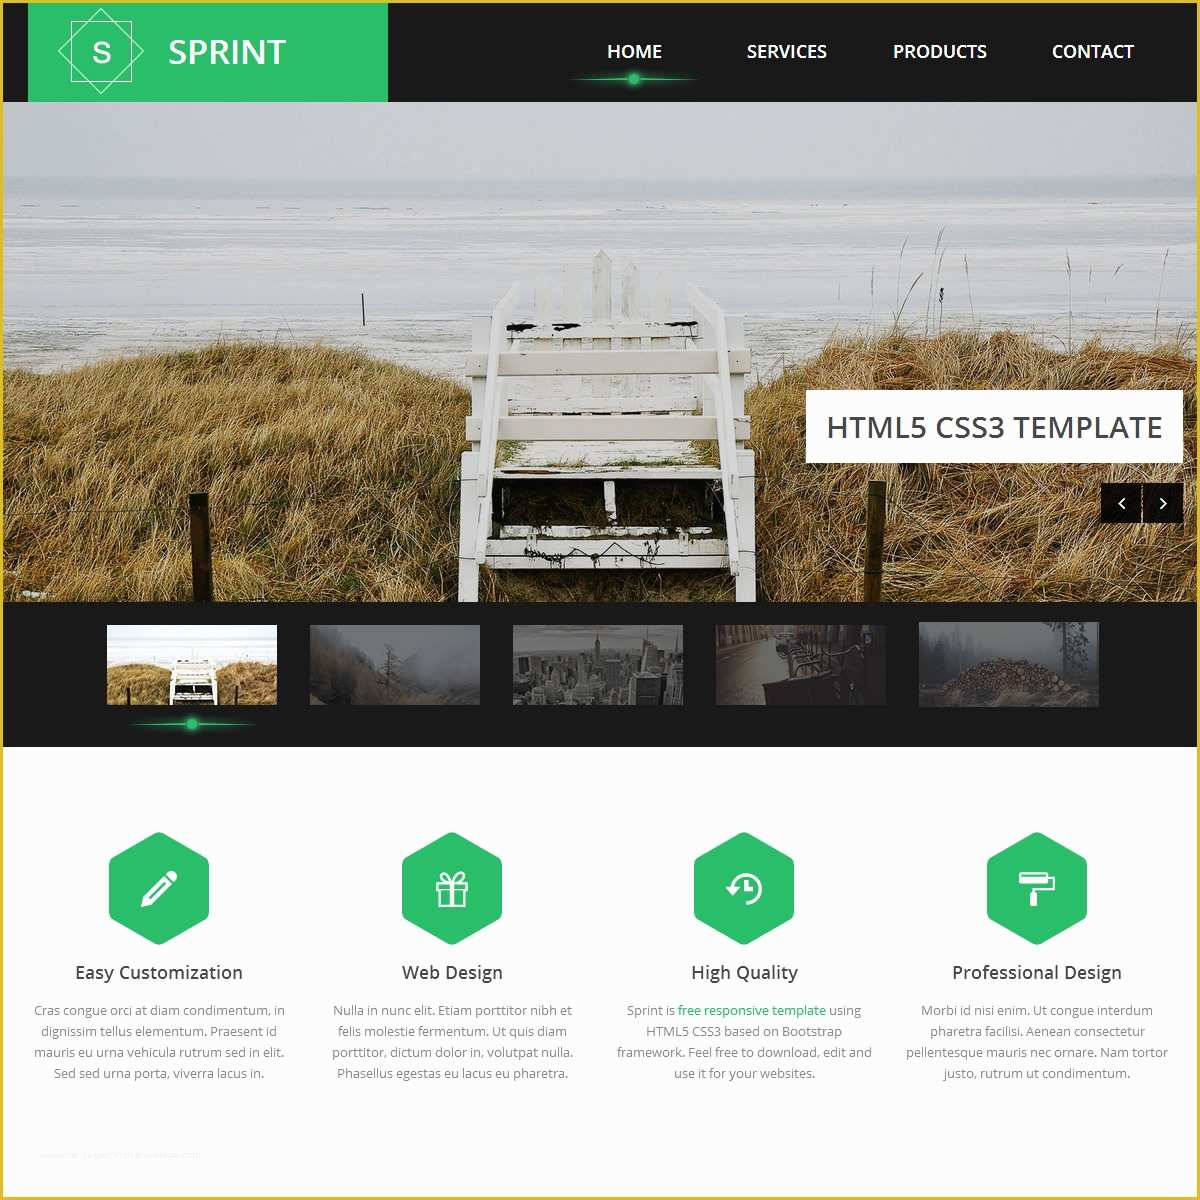 Free HTML5 Css3 Website Templates Of 30 Latest Free Responsive HTML5 Css3 Site Templates